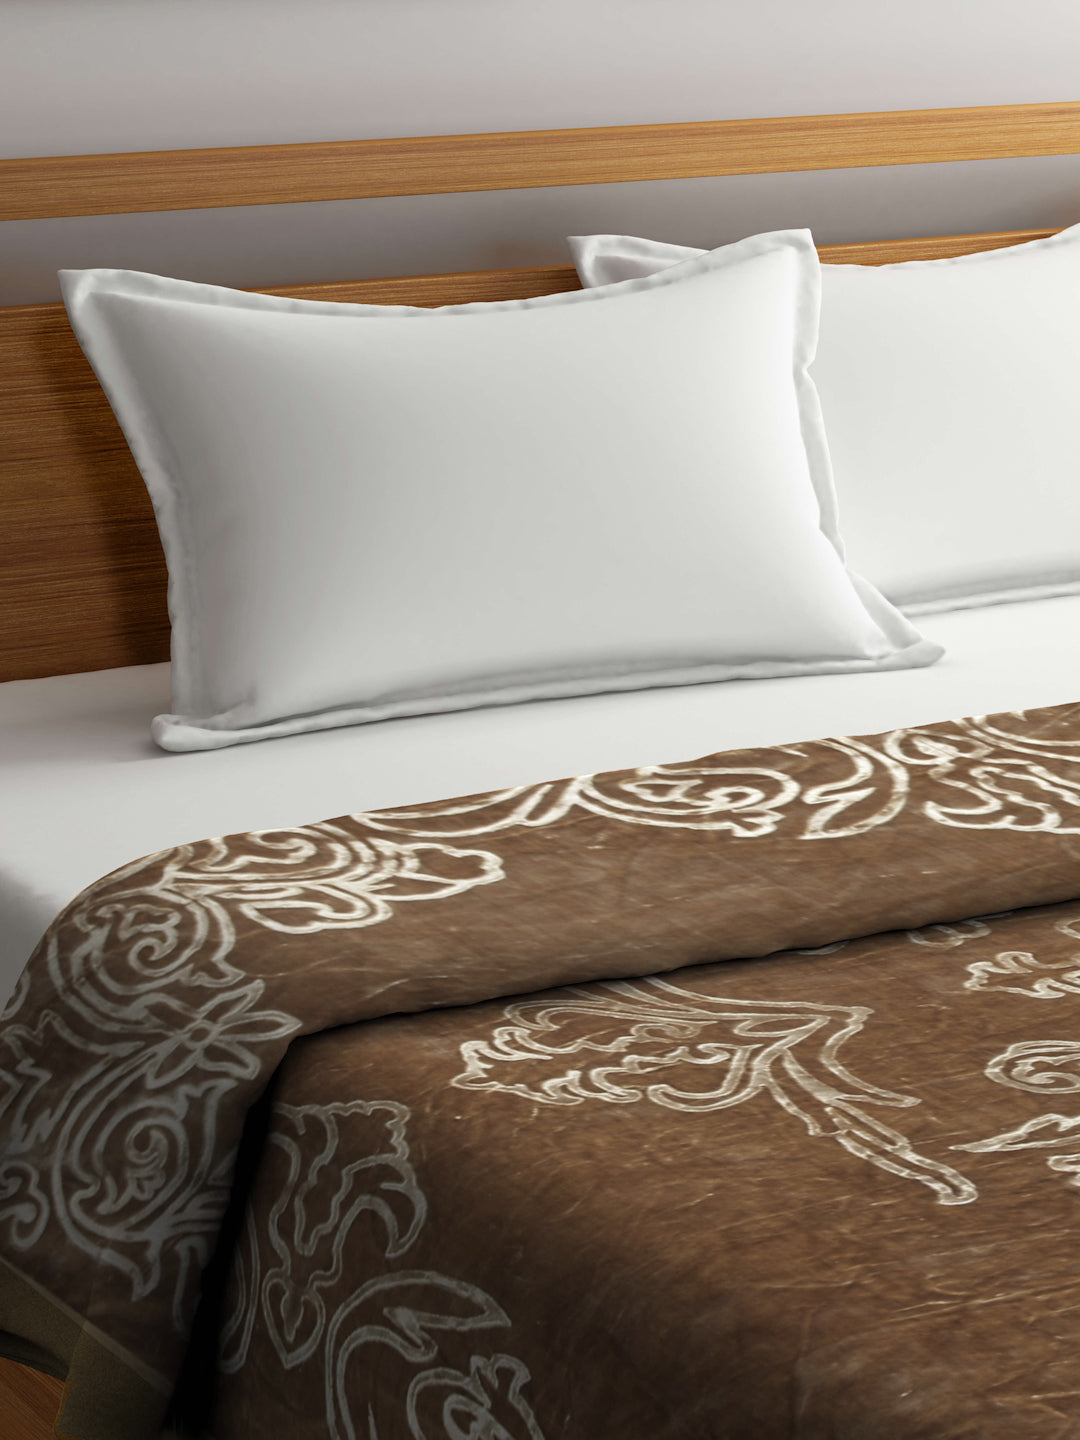 Arrabi Brown Floral Wool Blend 950 GSM Full Size Double Bed Blanket (210 X 200 cm)